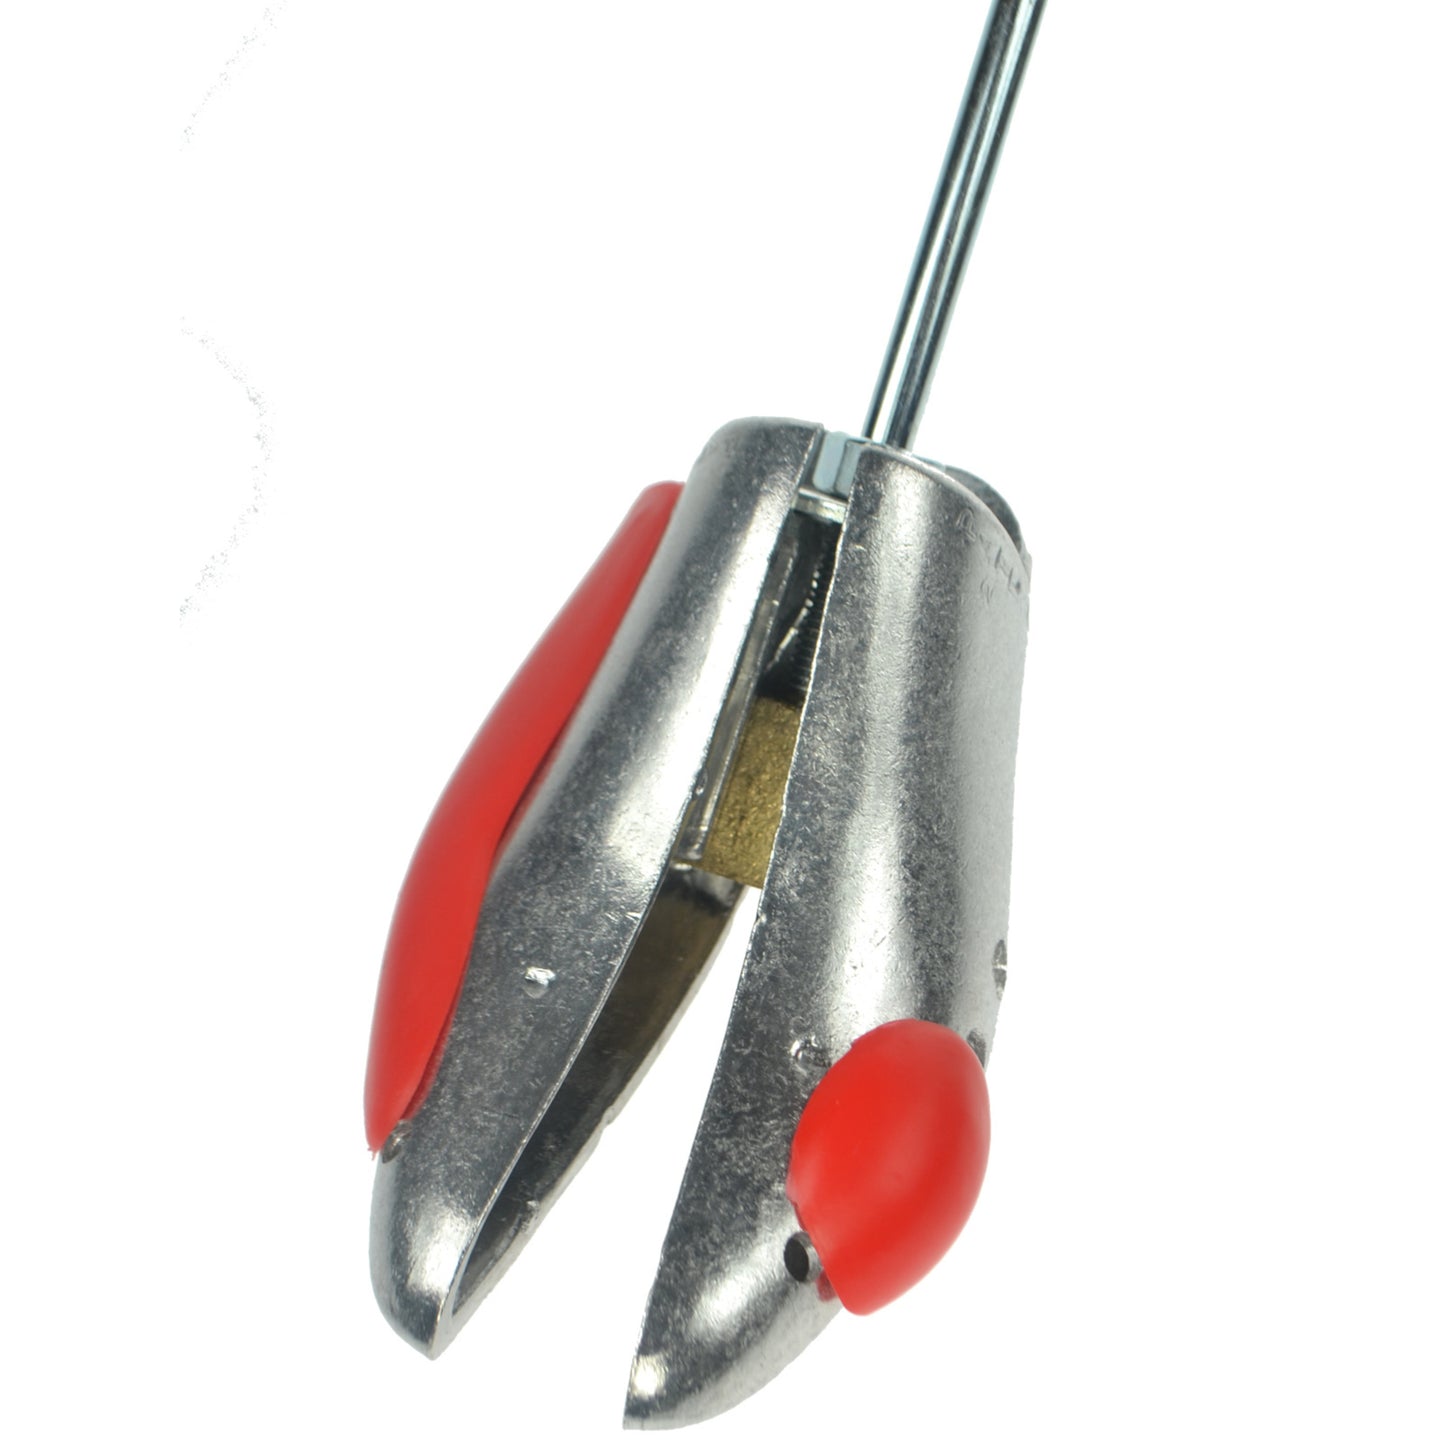 Metal Shoe Stretcher for widening shoes - Unisex